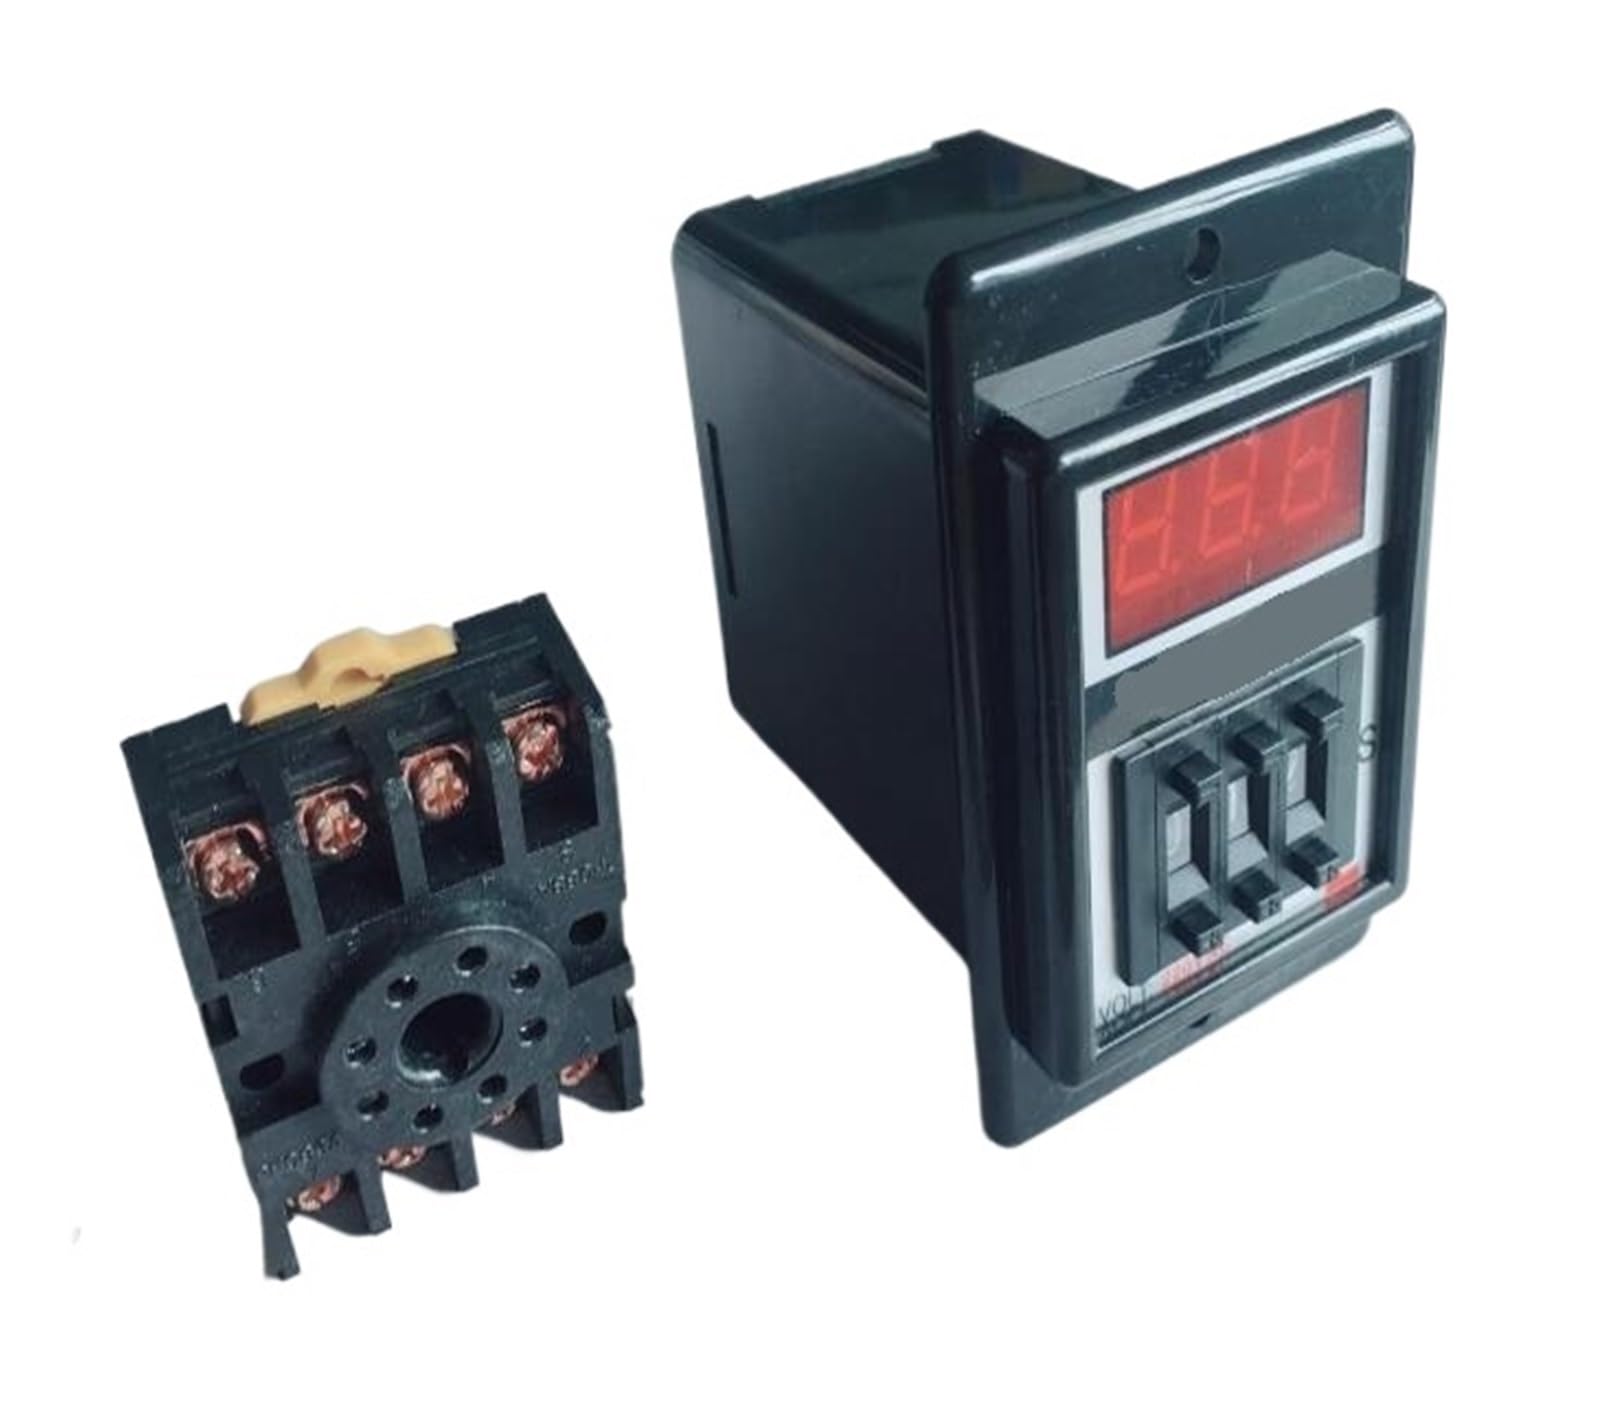 1-99S 1-9.9S 1-99M digits programmable timer delay relay ASY-2D Delay Timer Time Relay 8PIN with base NWPNLXEA(ASY-2D 99M,AC380V) von NWPNLXEA